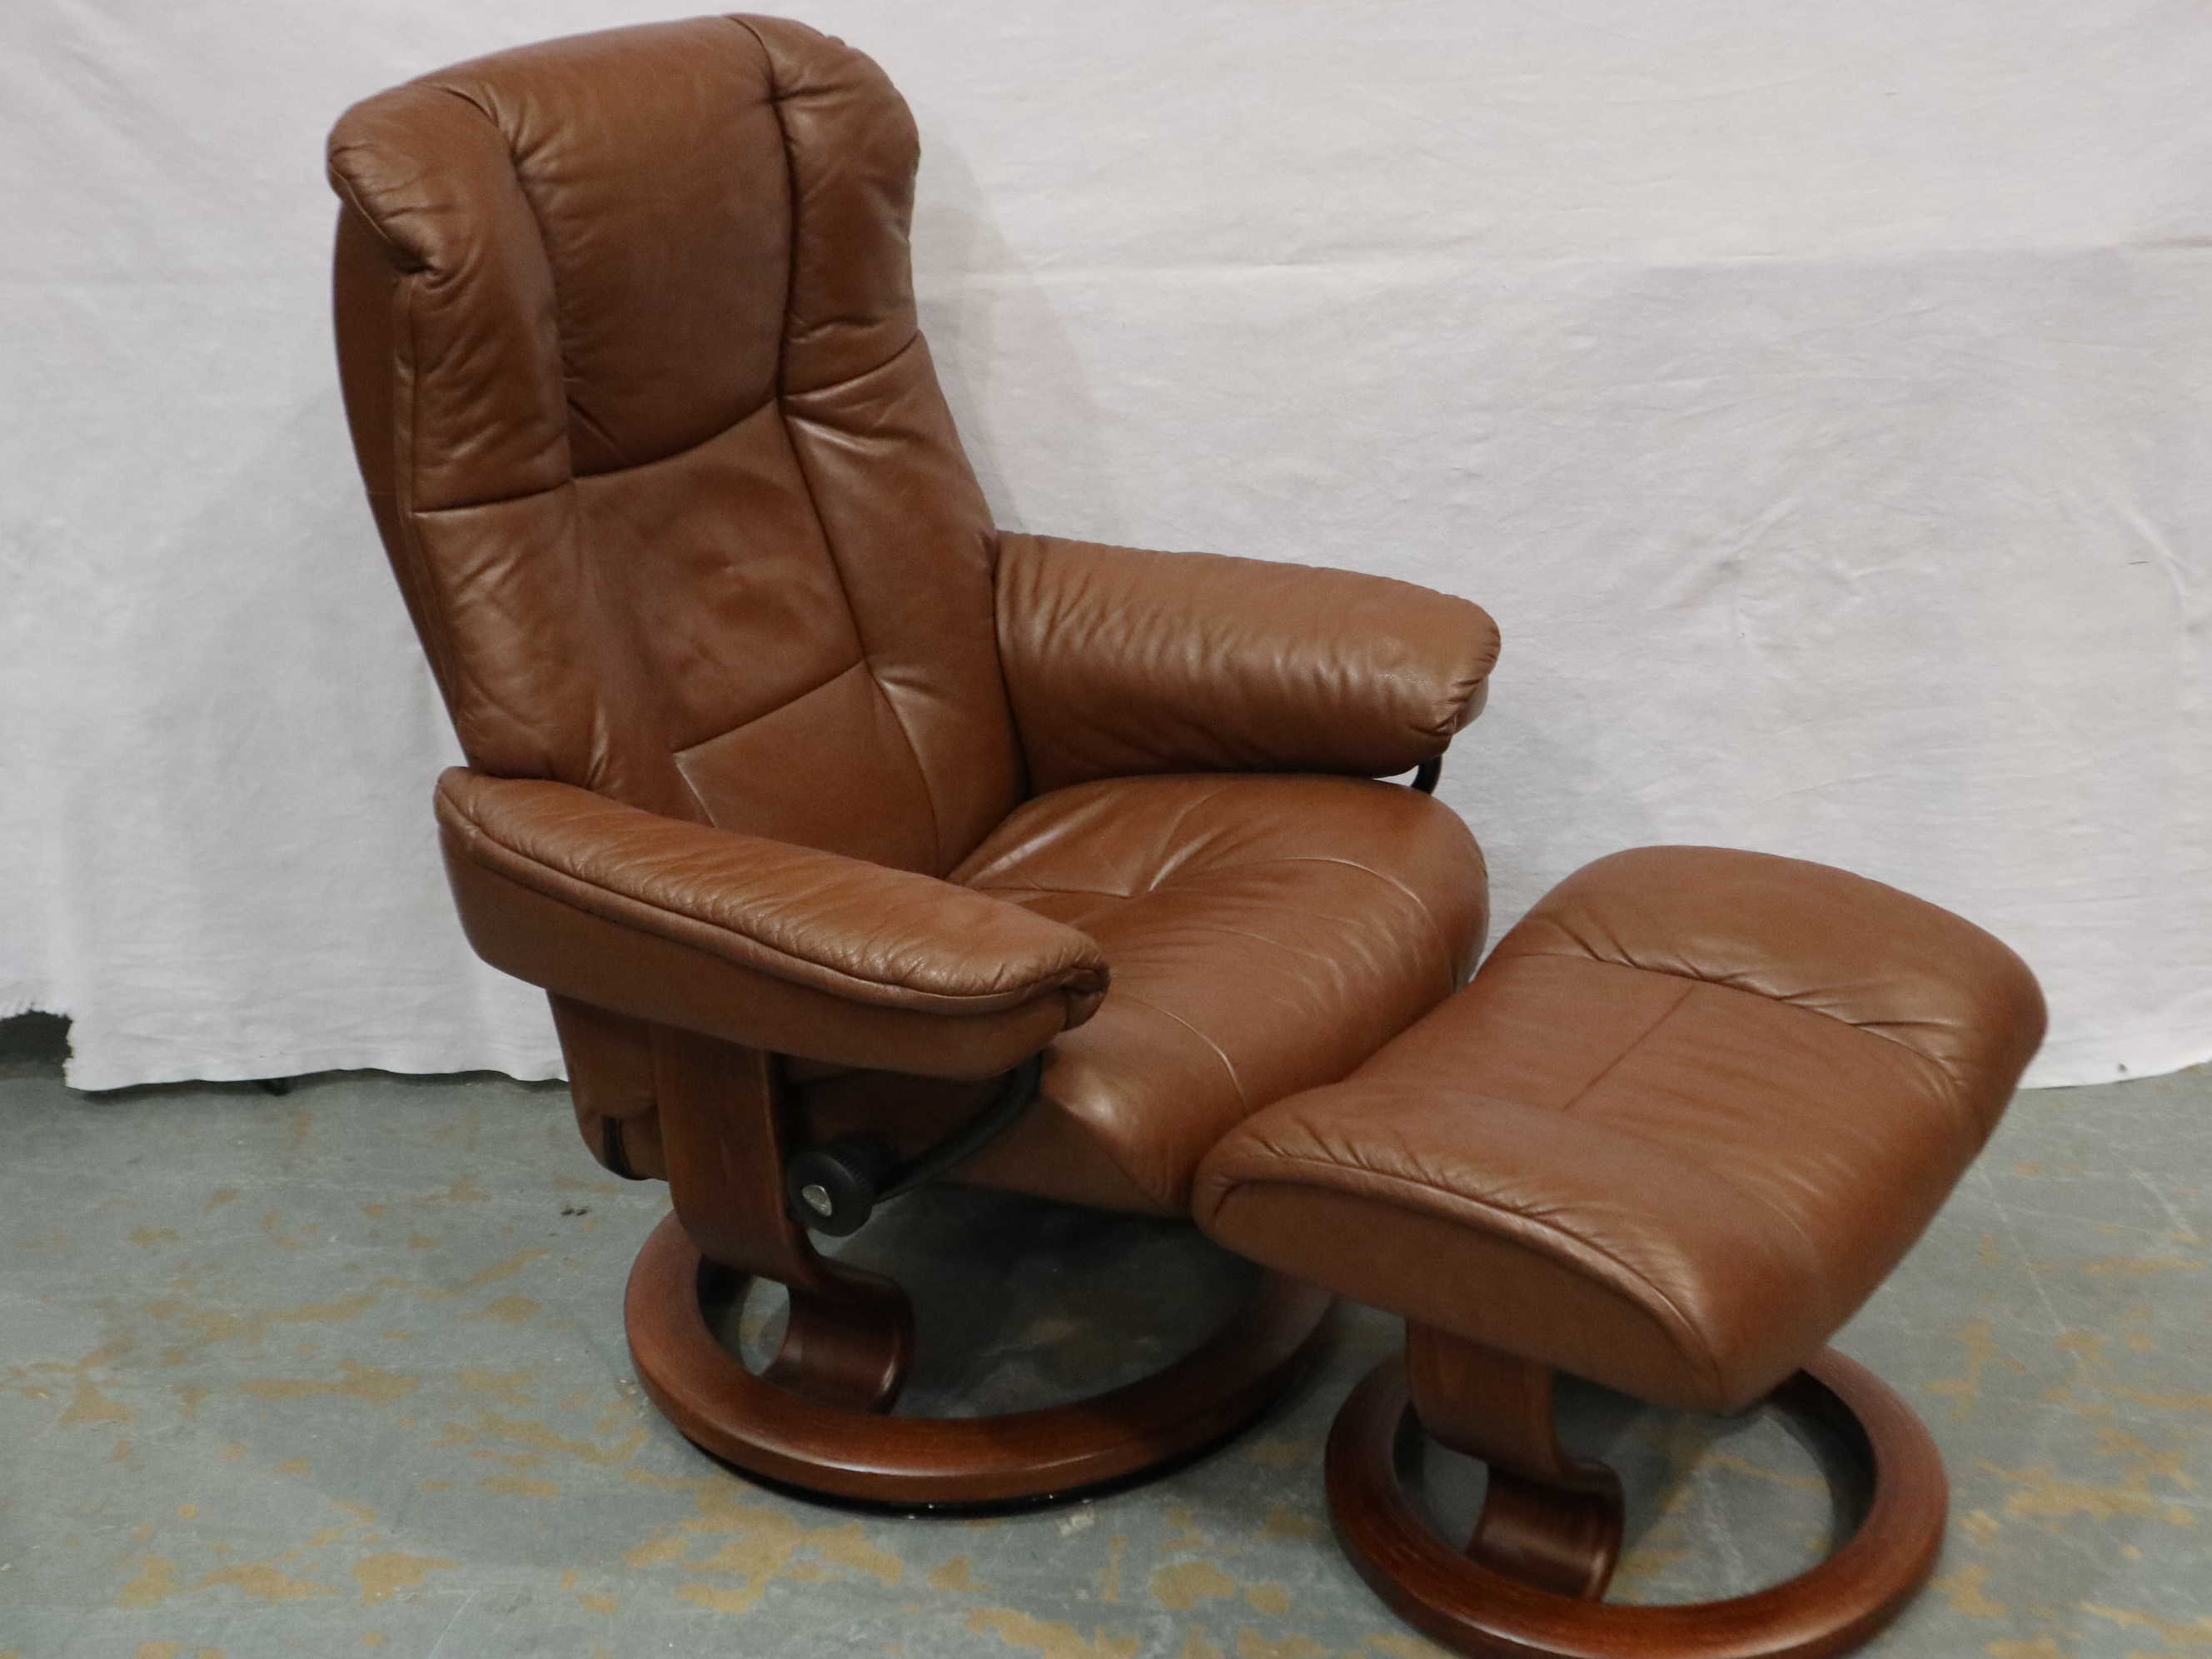 Stressless: A modern brown leather reclining easy chair with footstool. Not available for in-house